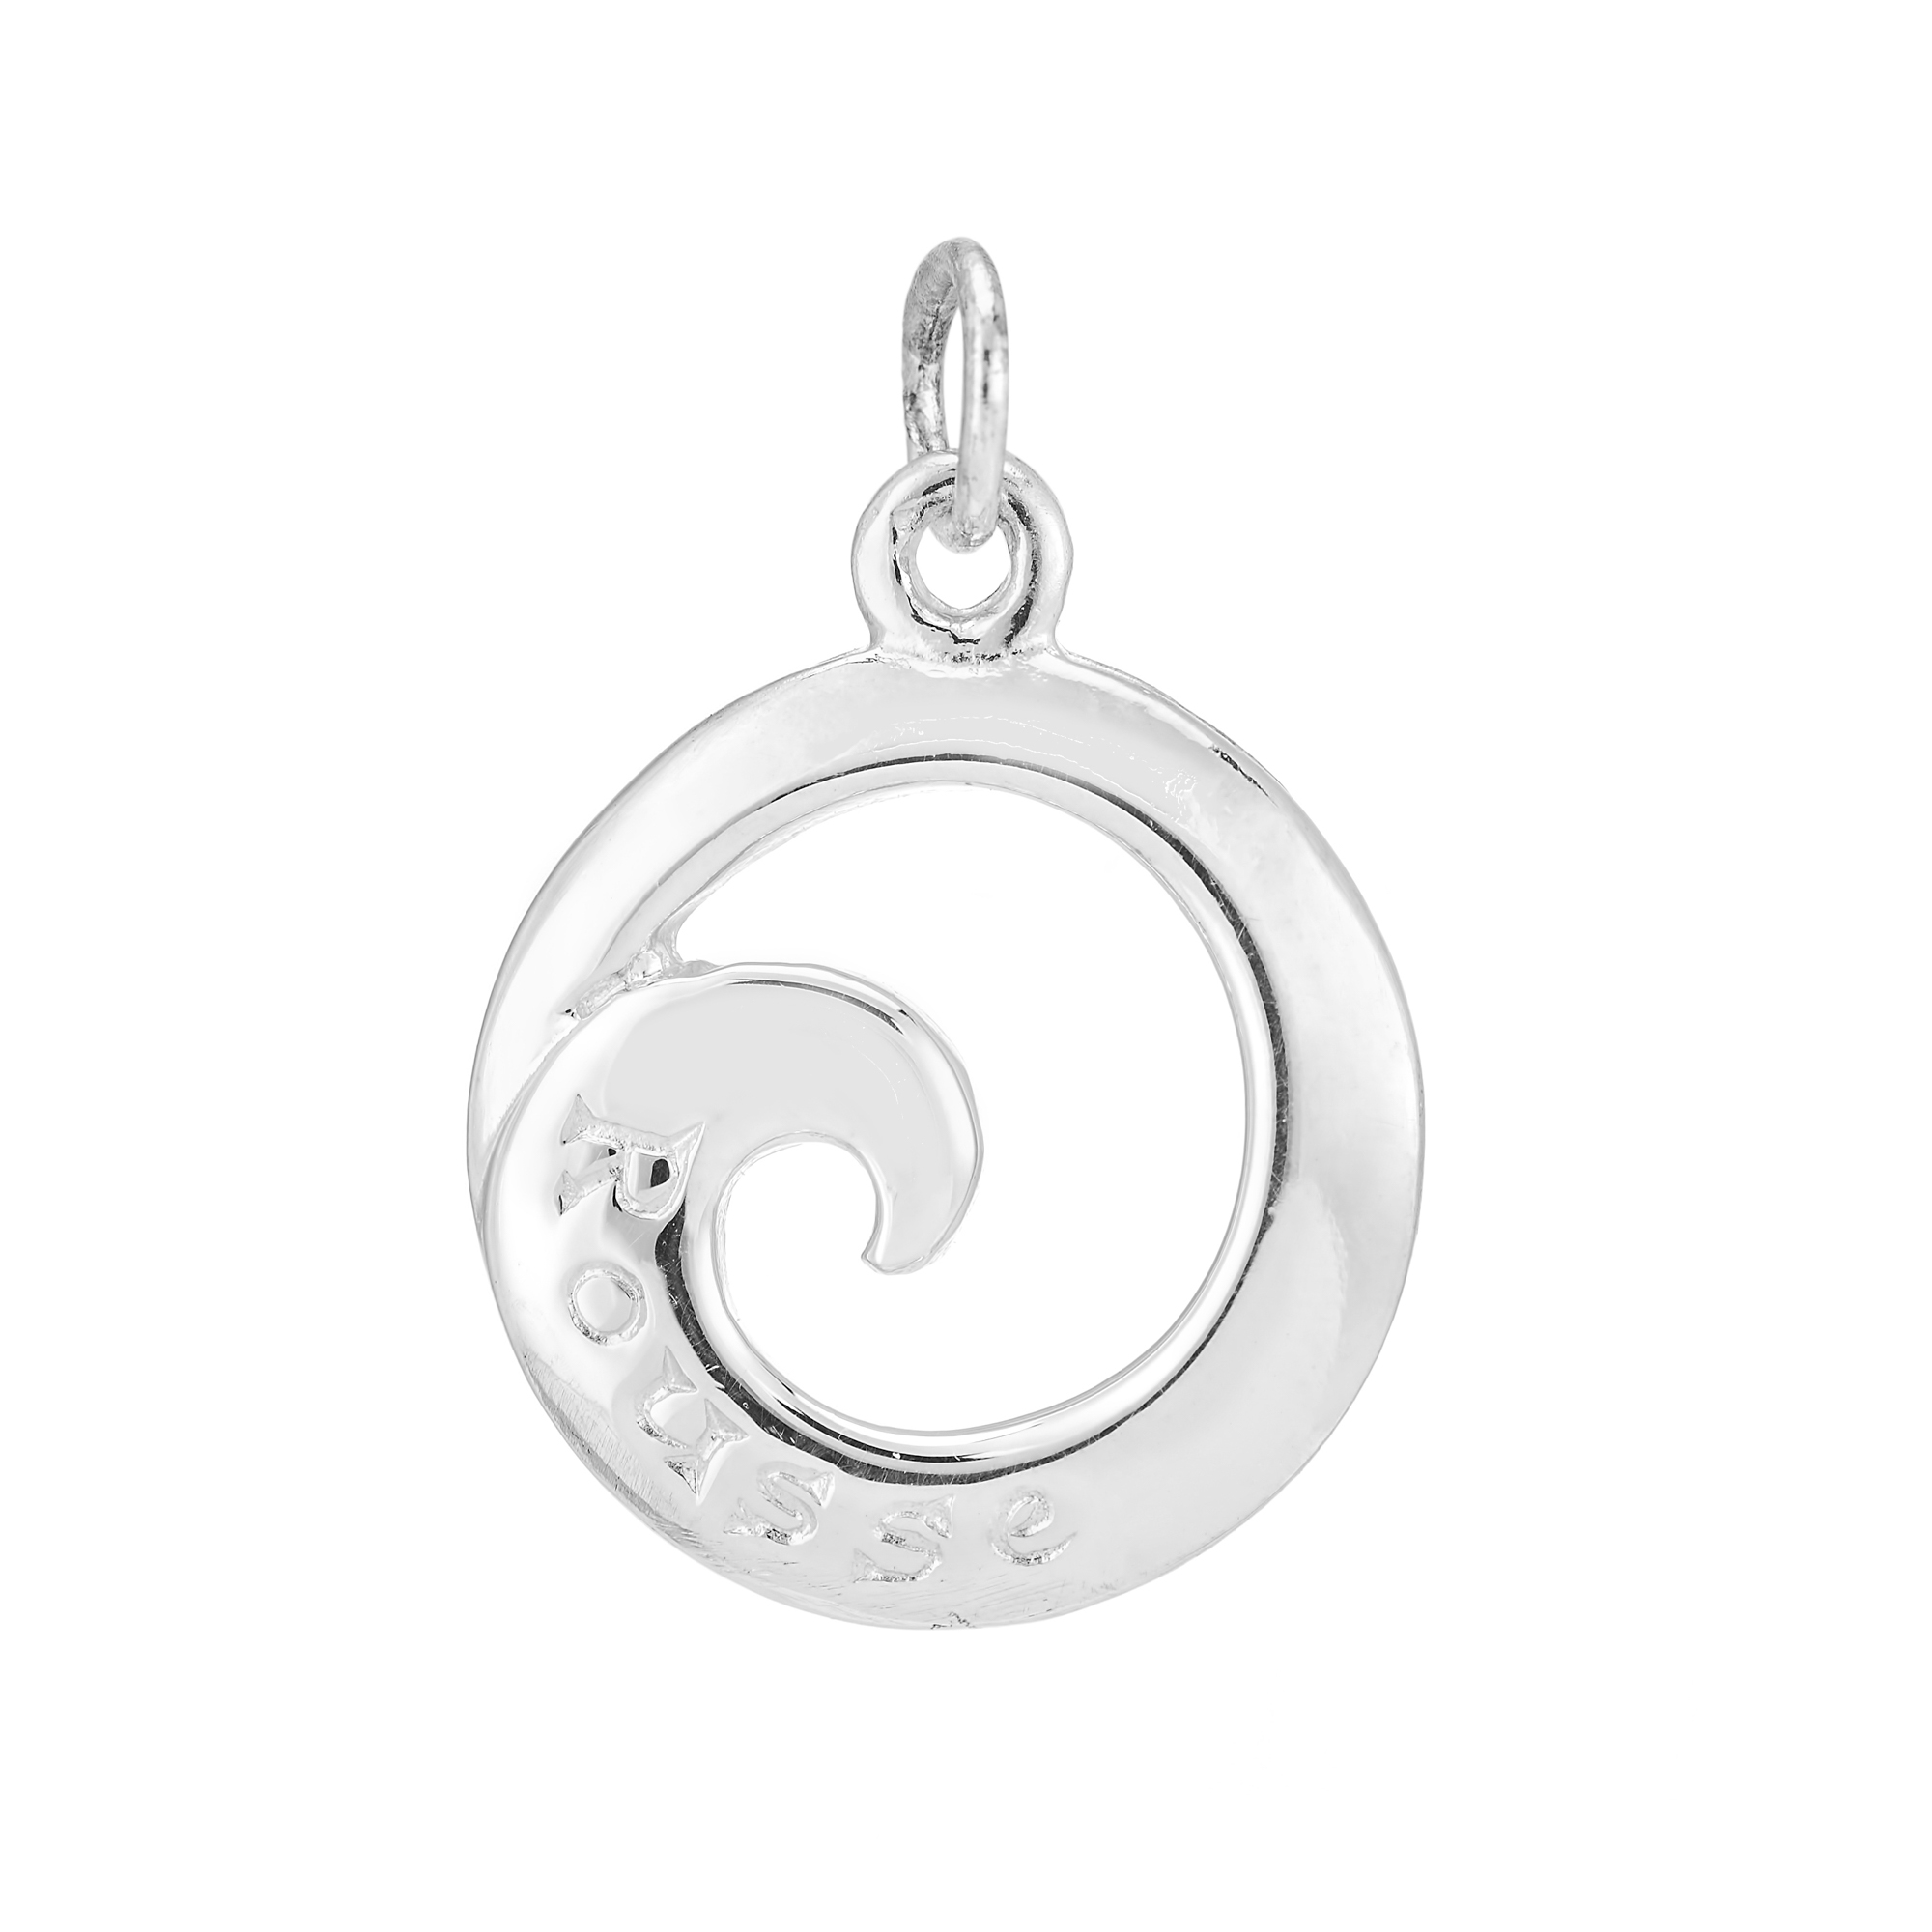 Rousse Sterling Silver Charm / Pendant  (Beach / Bays)